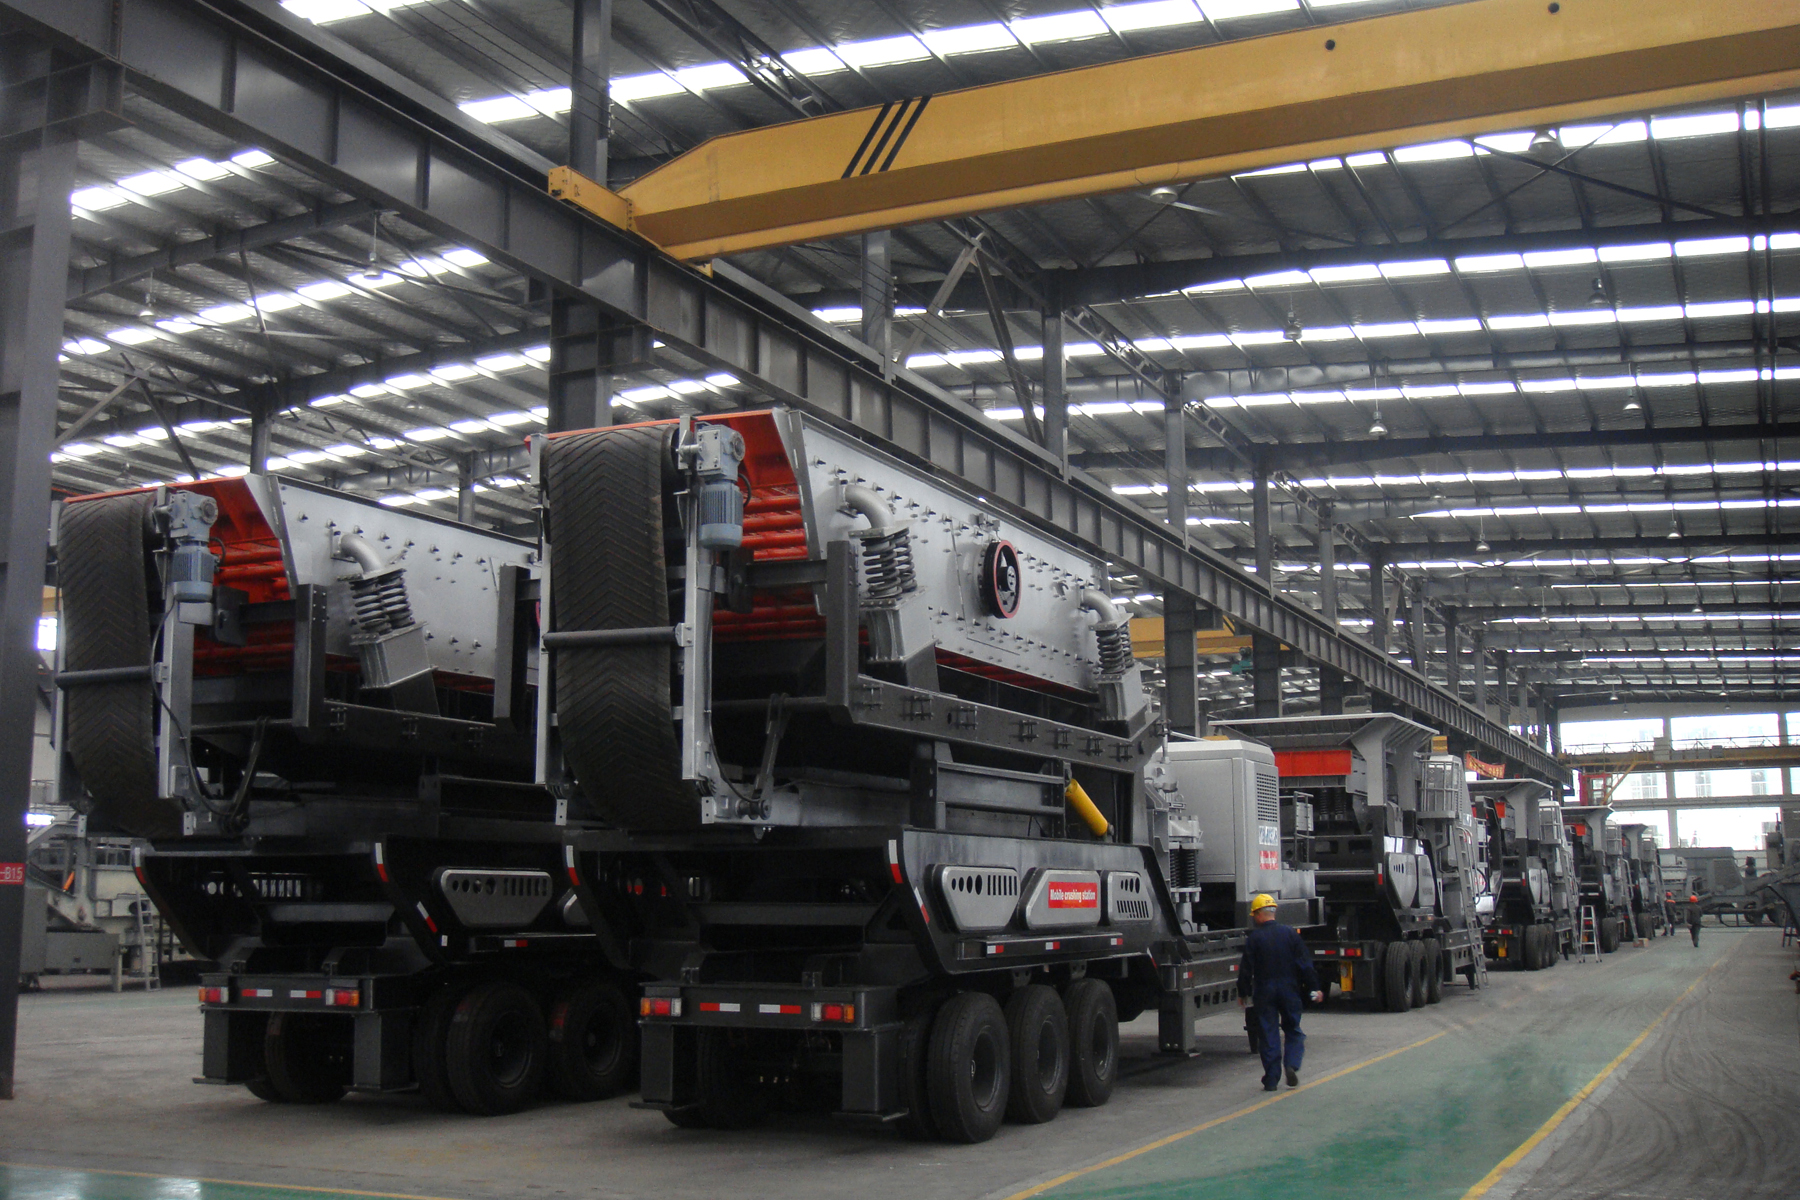 crushing machine in production factory